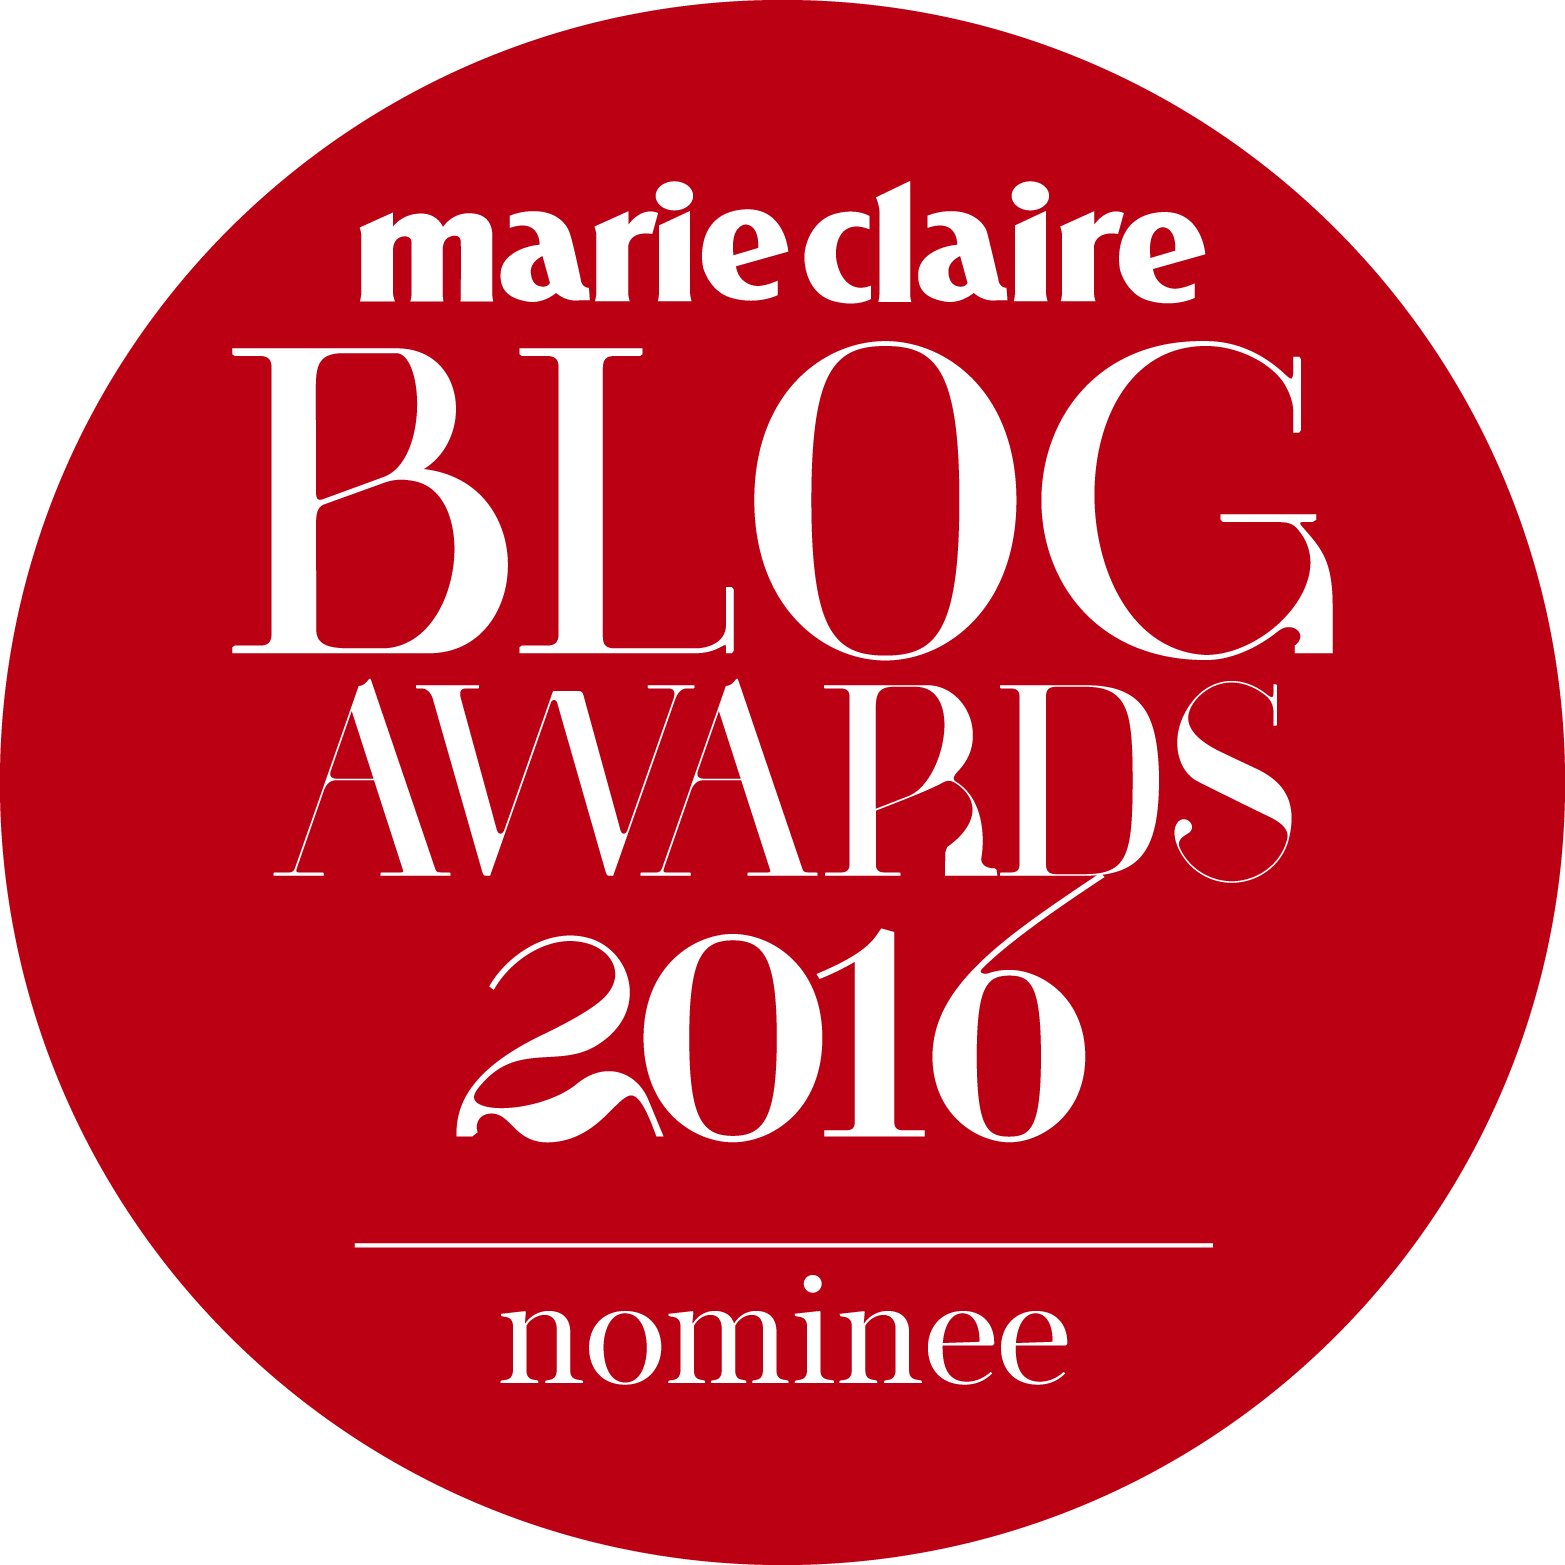 Marie Claire Blog Awards 2016 Nominee